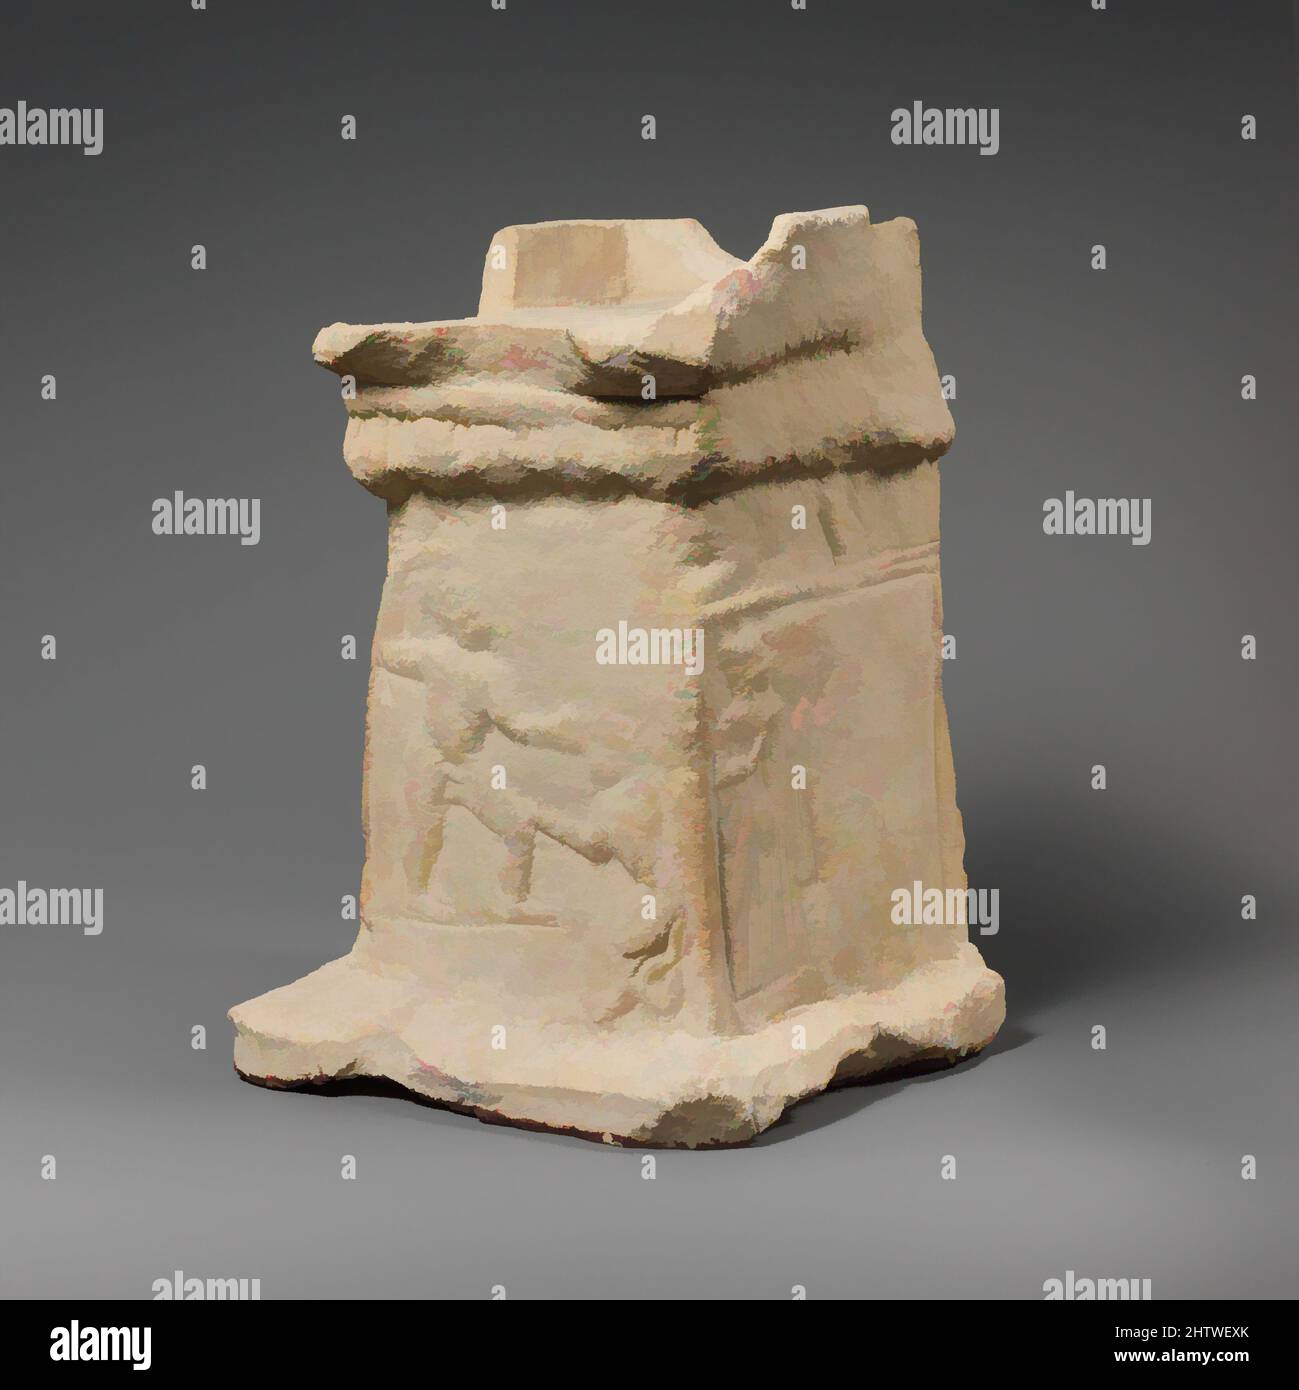 Art inspired by Limestone altar, Classical, late 5th century B.C., Cypriot, Limestone, Overall: 10 1/8 × 7 × 7 in. (25.7 cm), Stone Sculpture, On the front, Herakles fighting the Nemean lion. On the adjacent sides, two female votaries, Classic works modernized by Artotop with a splash of modernity. Shapes, color and value, eye-catching visual impact on art. Emotions through freedom of artworks in a contemporary way. A timeless message pursuing a wildly creative new direction. Artists turning to the digital medium and creating the Artotop NFT Stock Photo